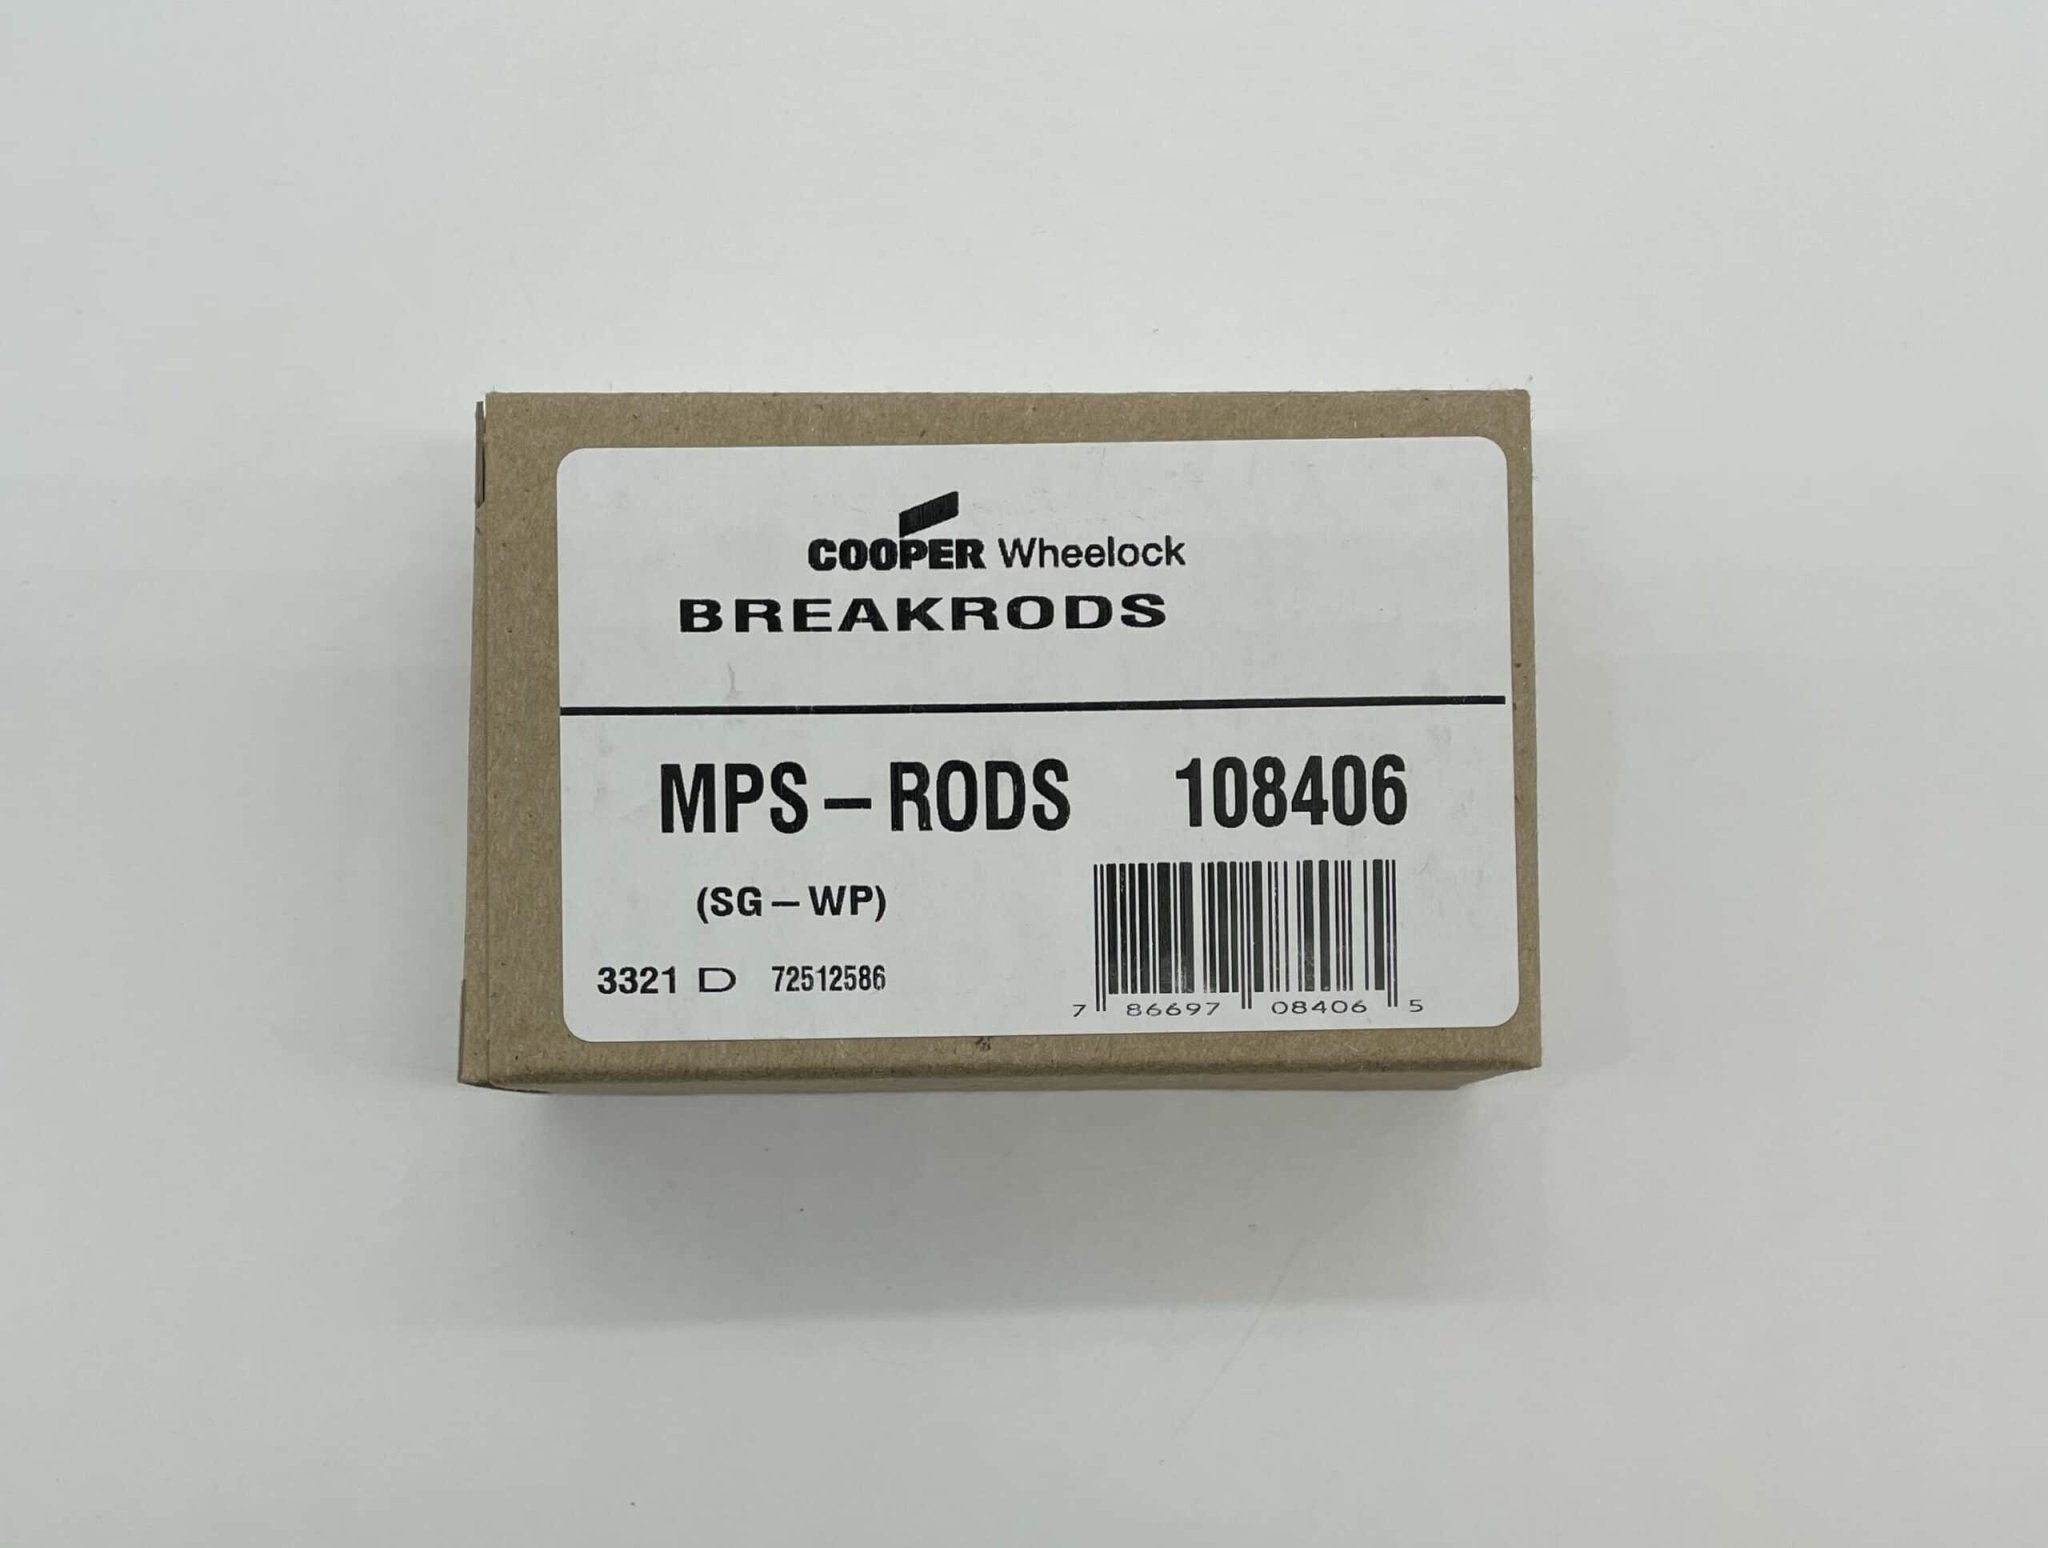 Wheelock MPS-RODS - The Fire Alarm Supplier